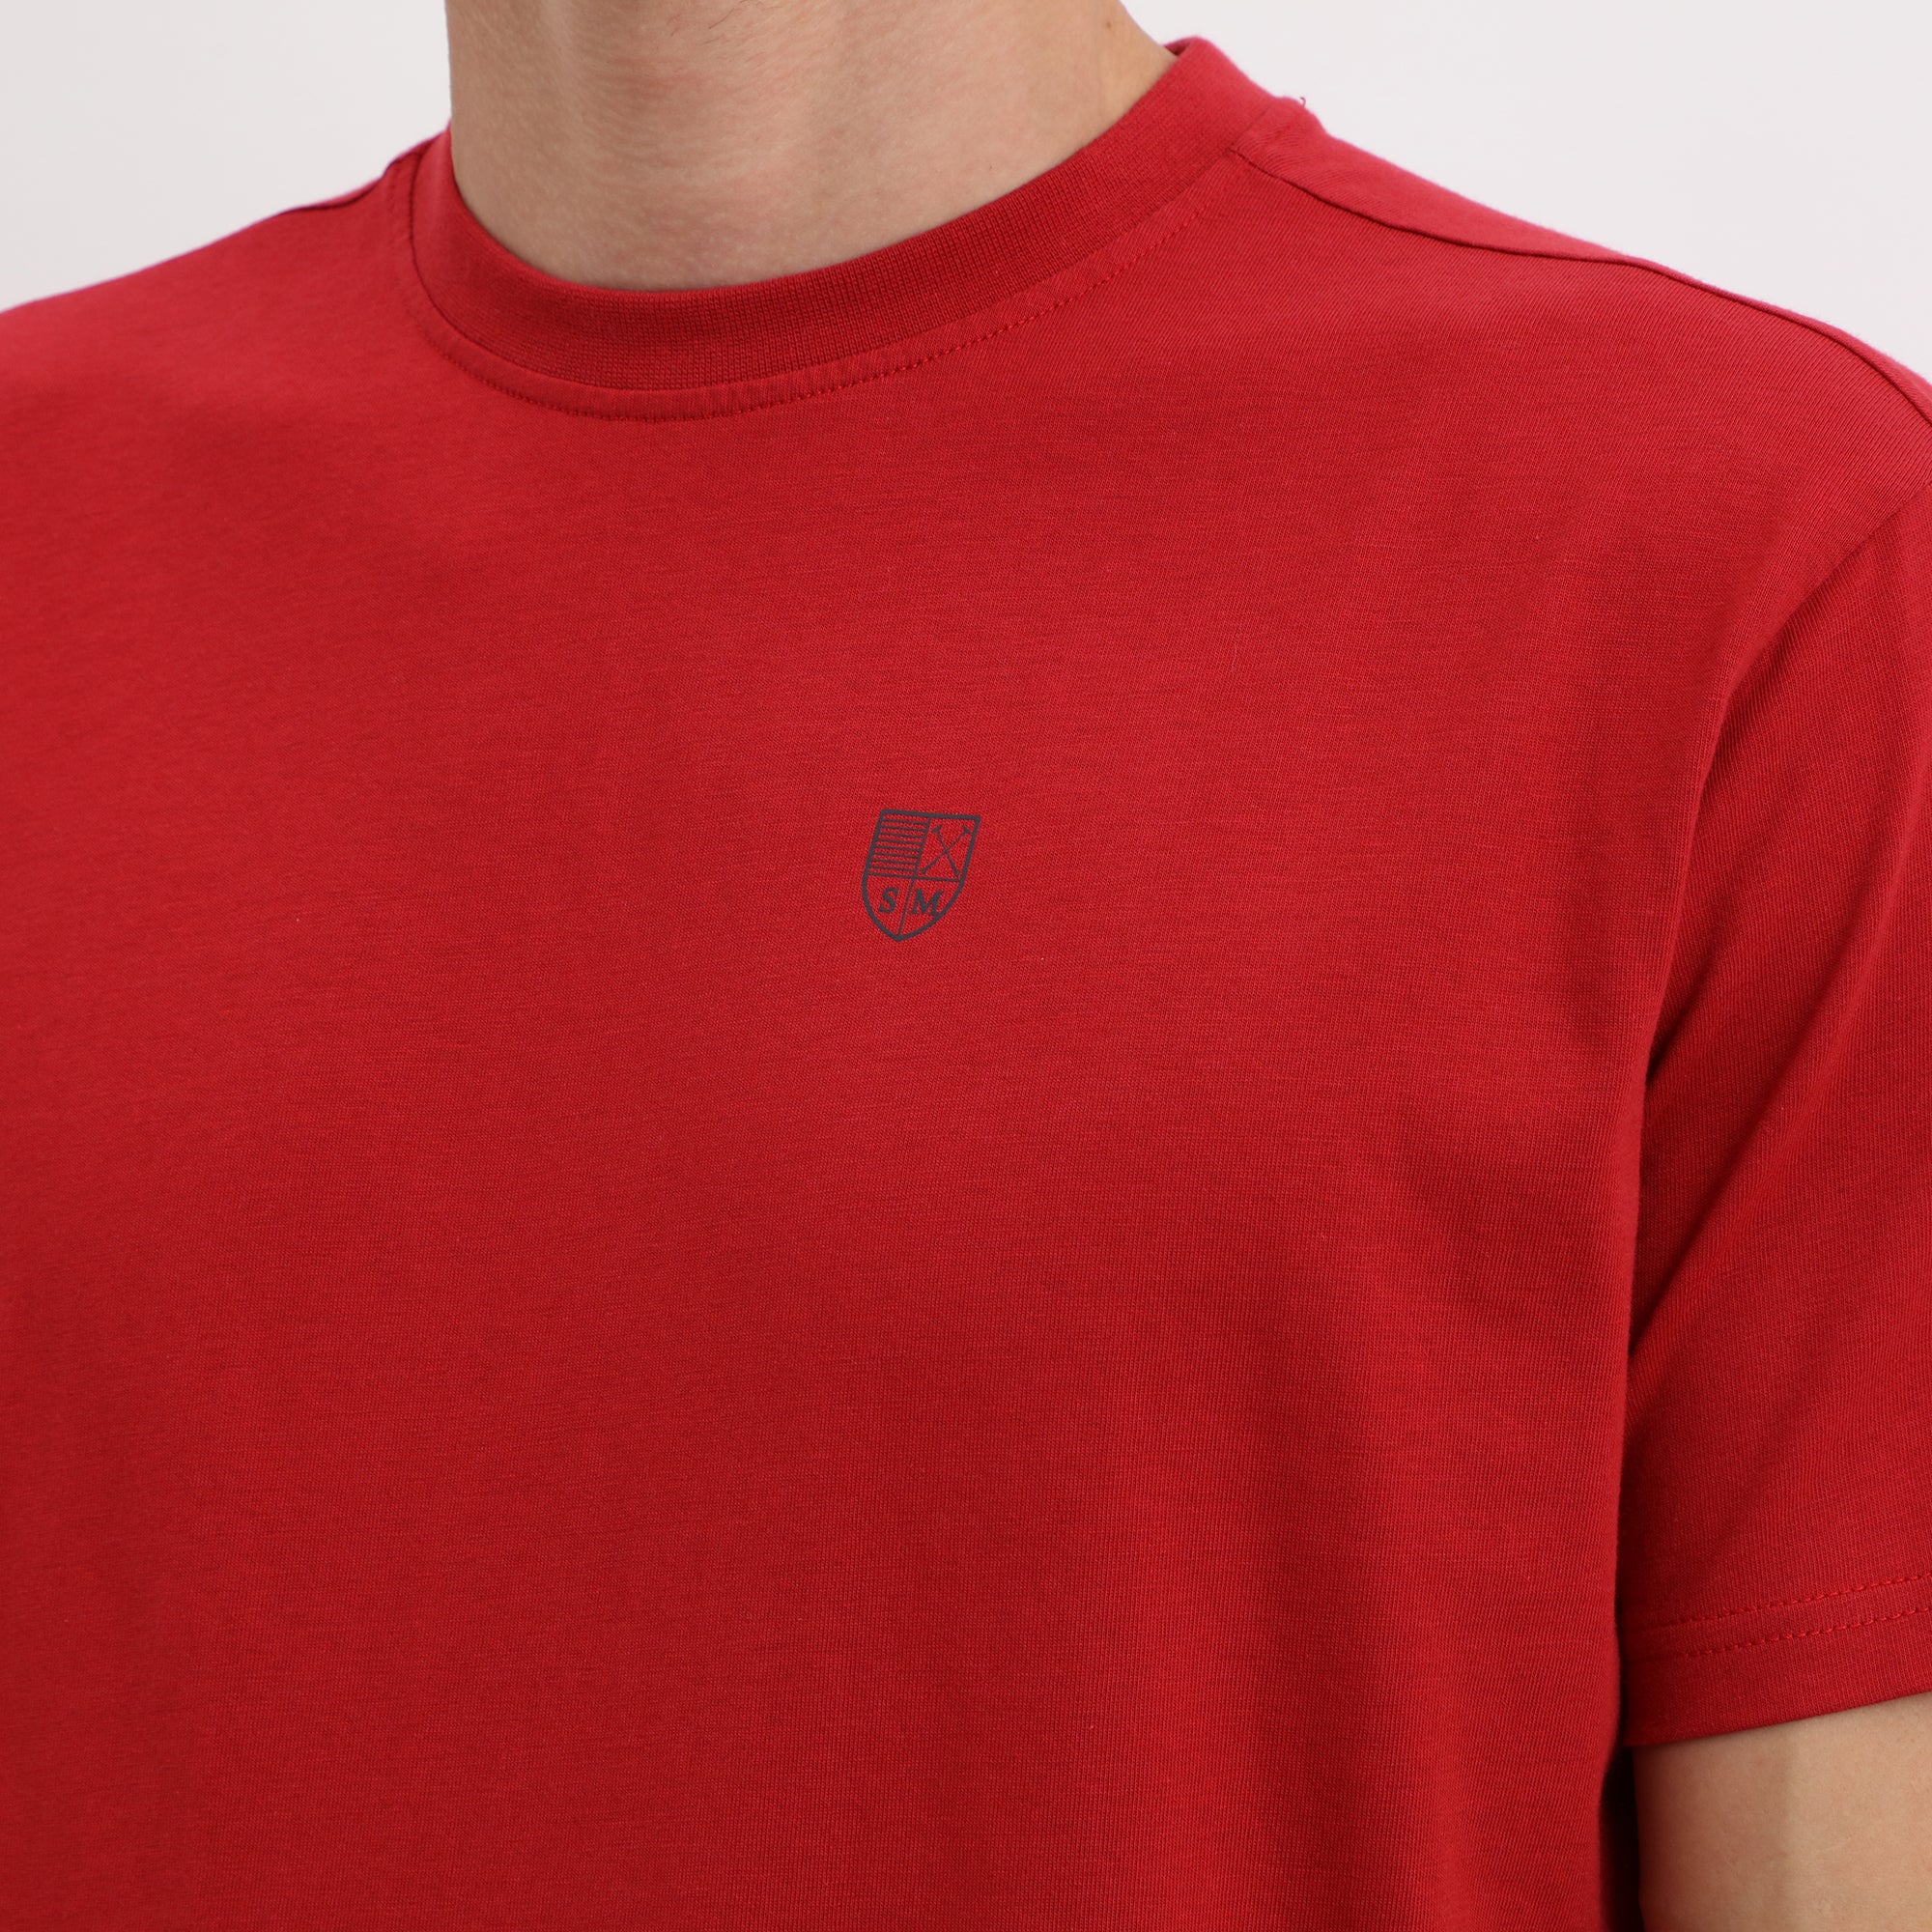 Jersey T-shirt with heart side logo print